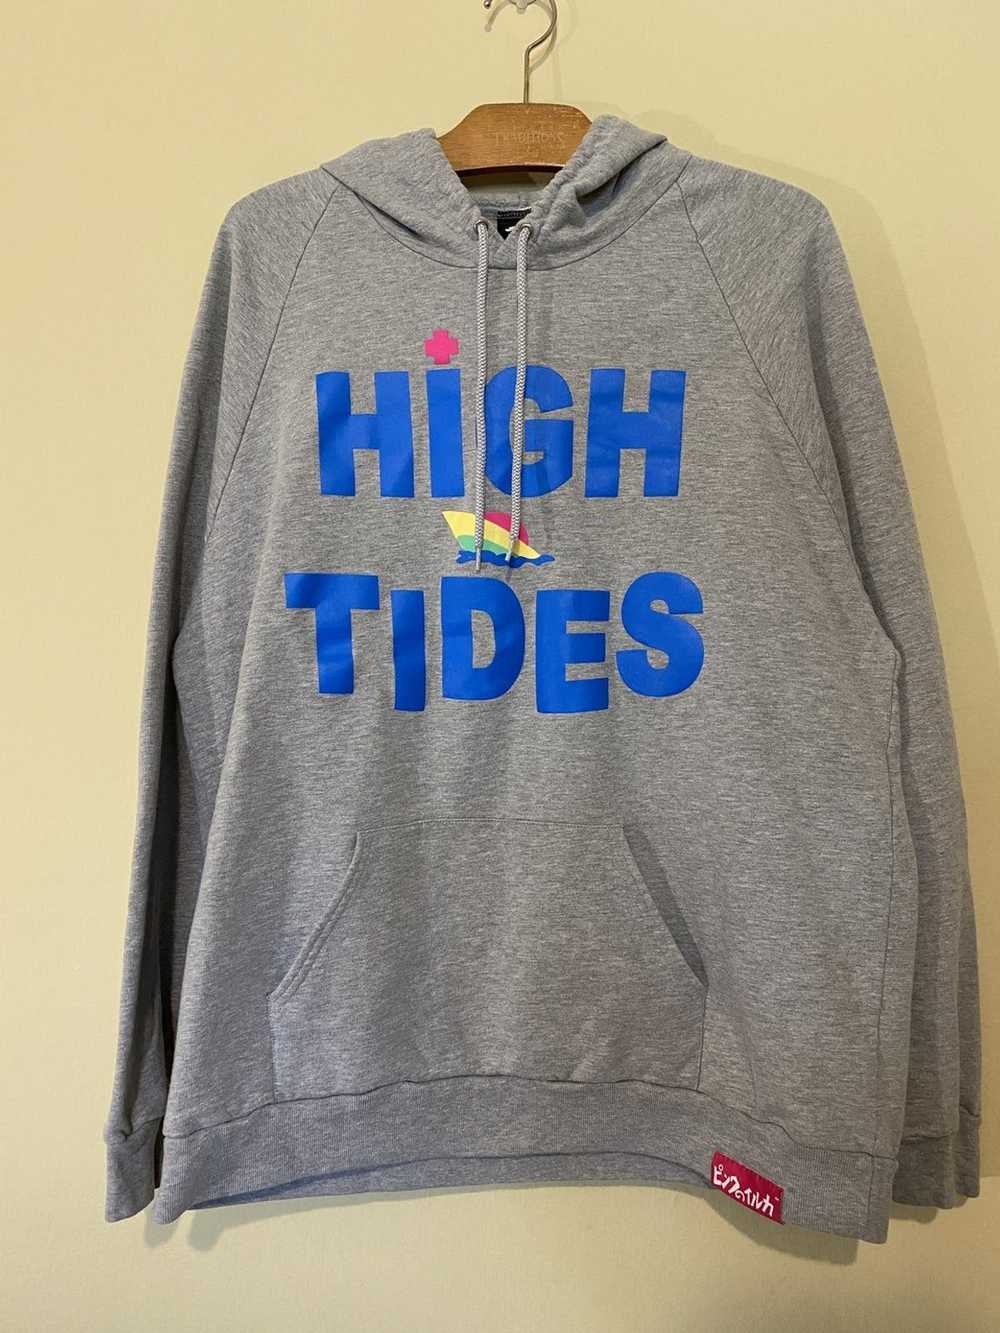 Pink Dolphin Pink Dolphin XL High Tides Hoodie - image 2